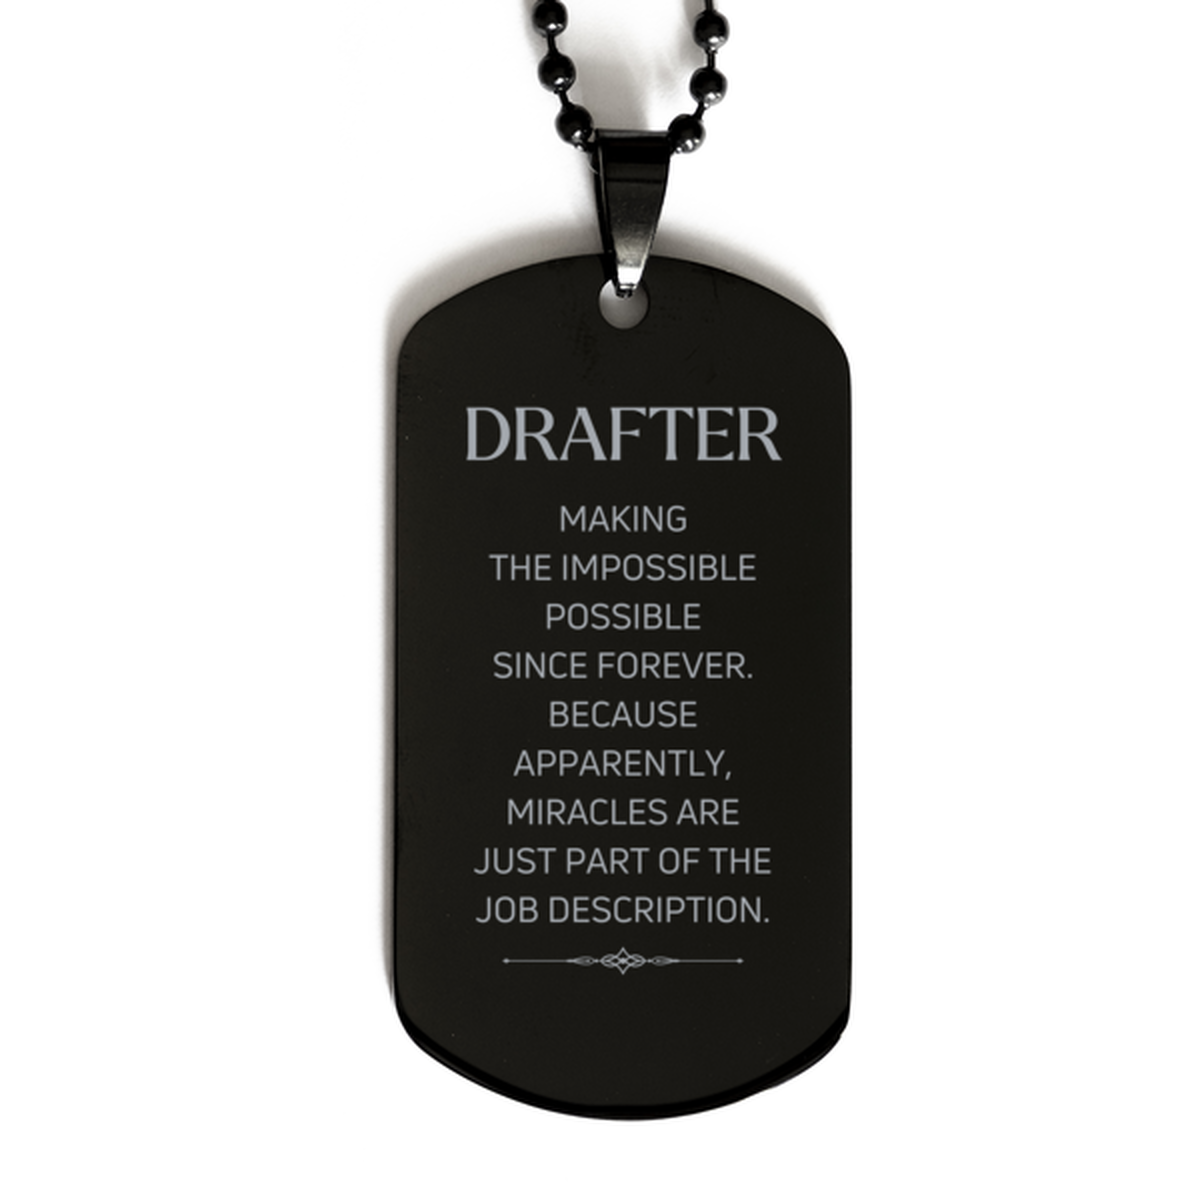 Funny Drafter Gifts, Miracles are just part of the job description, Inspirational Birthday Black Dog Tag For Drafter, Men, Women, Coworkers, Friends, Boss